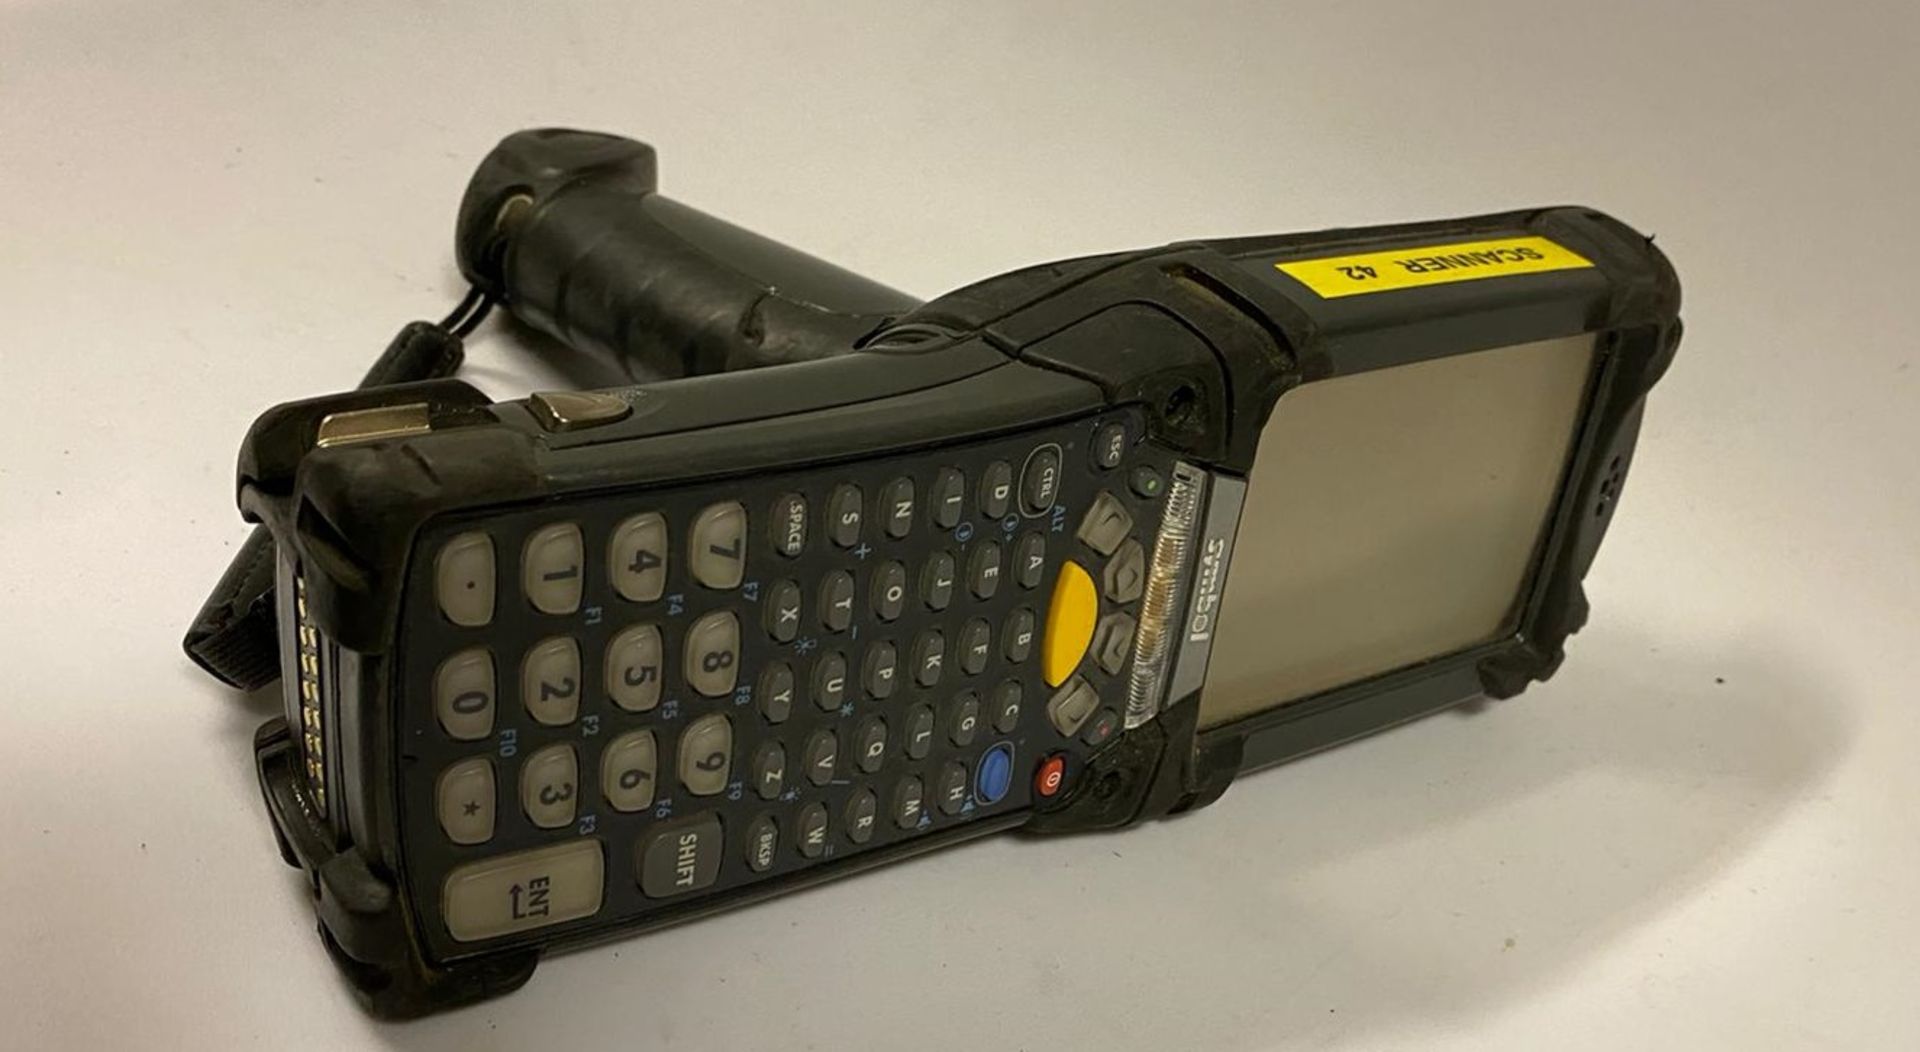 1 x Symbole MC9010 Mobile Barcode Scanner - Used Condition (See Below) - Location: Altrincham WA14 - Image 5 of 6